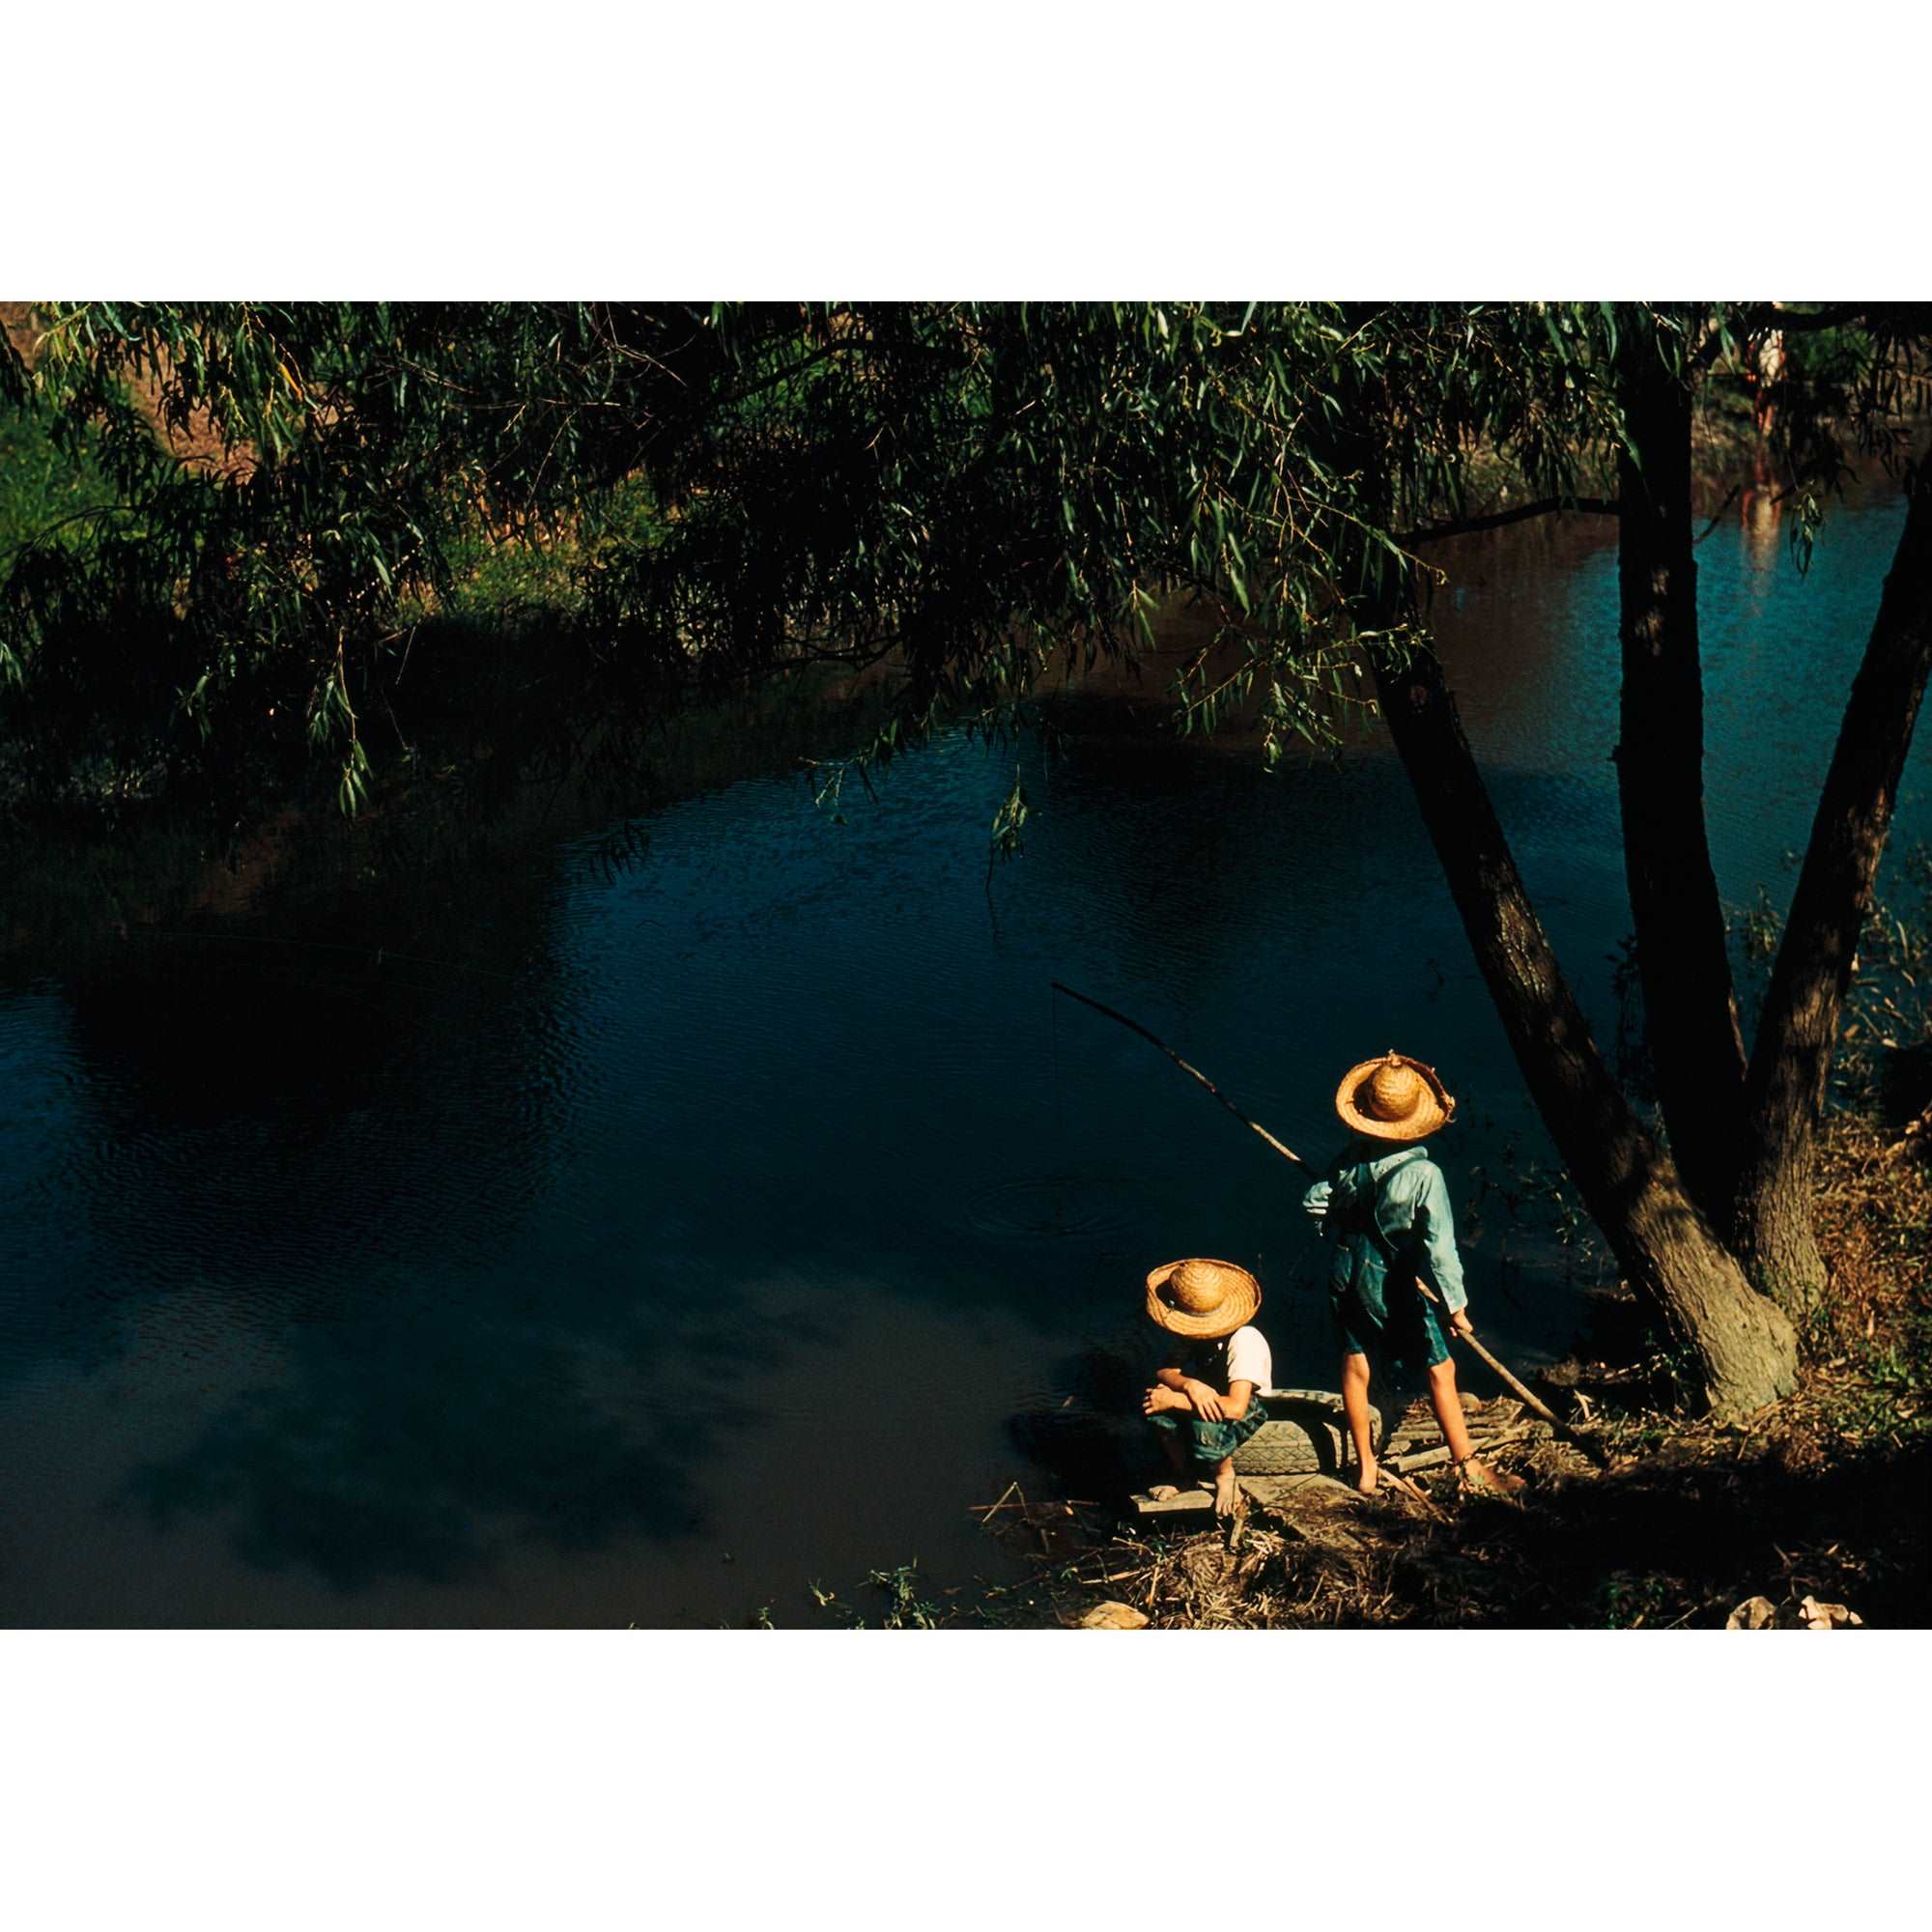 A color, vintage photograph of two boys fishing in a Louisiana Bayou